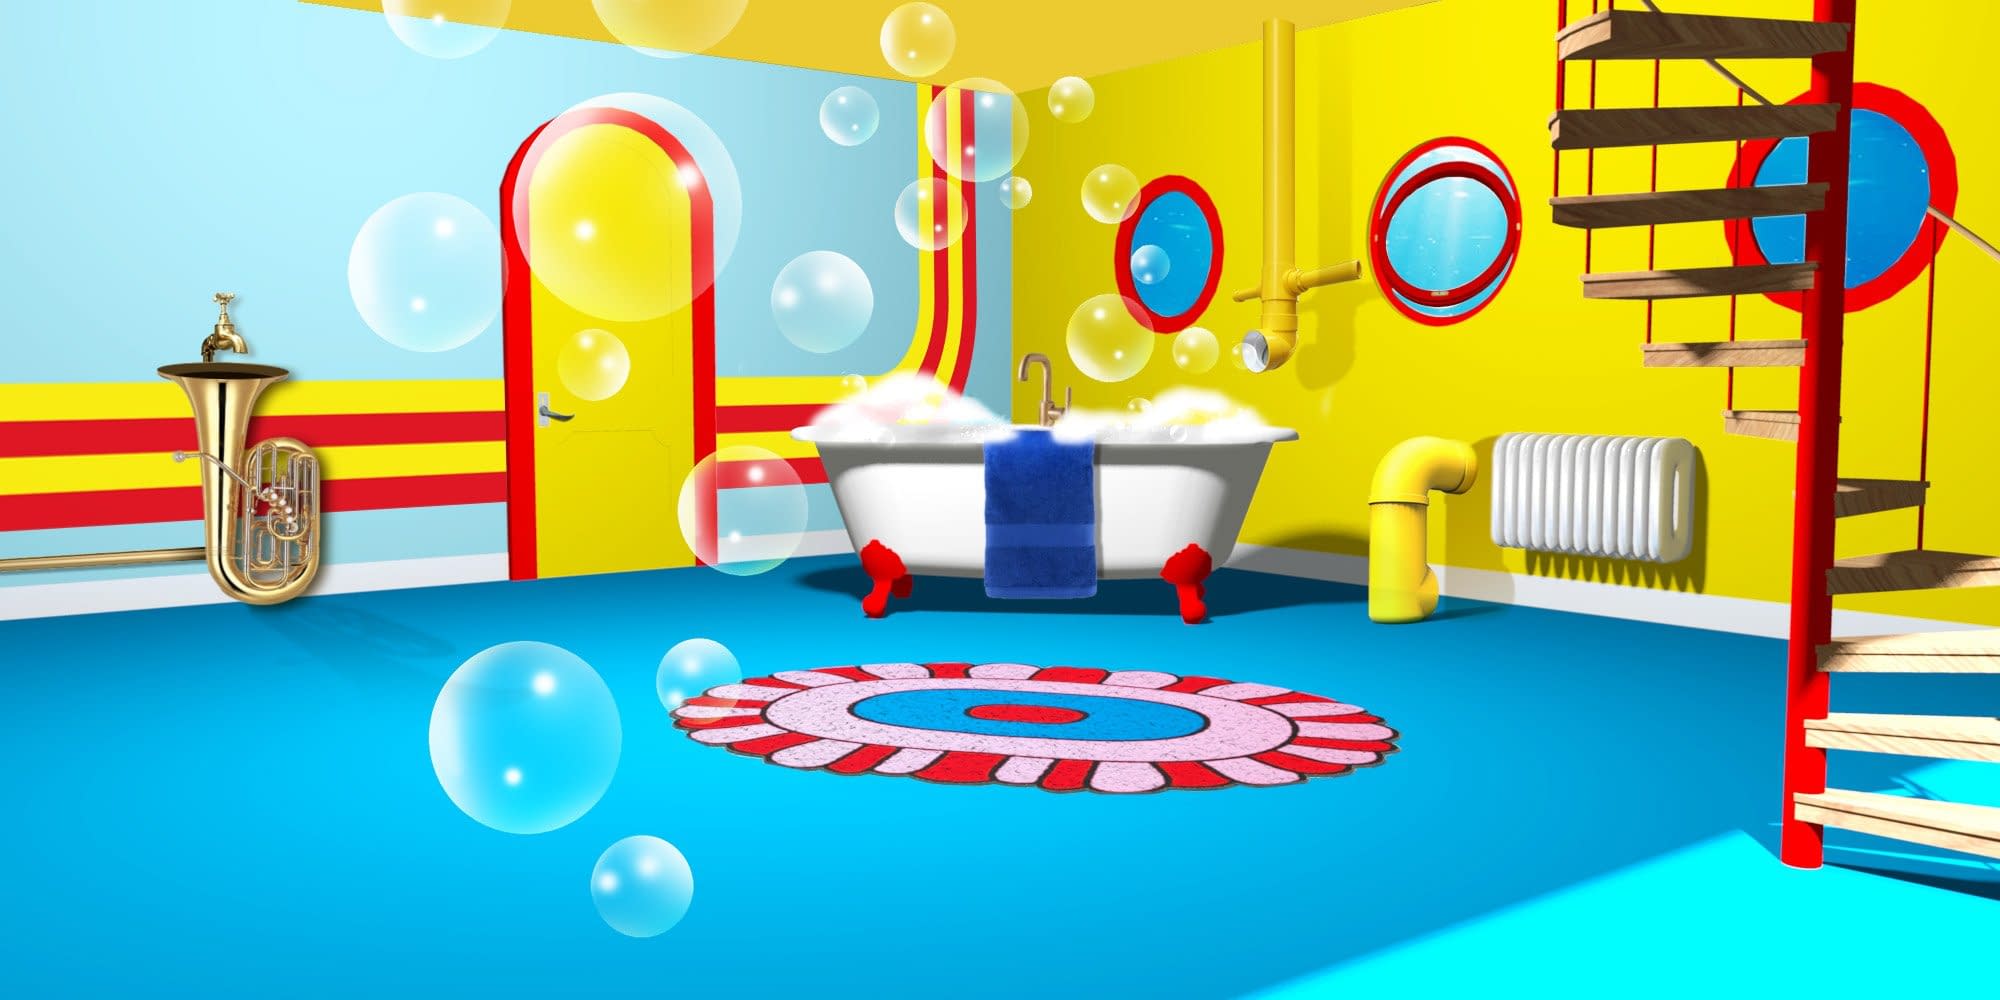 Featured Image - bathroom inspired by the Beatles' Yellow Submarine